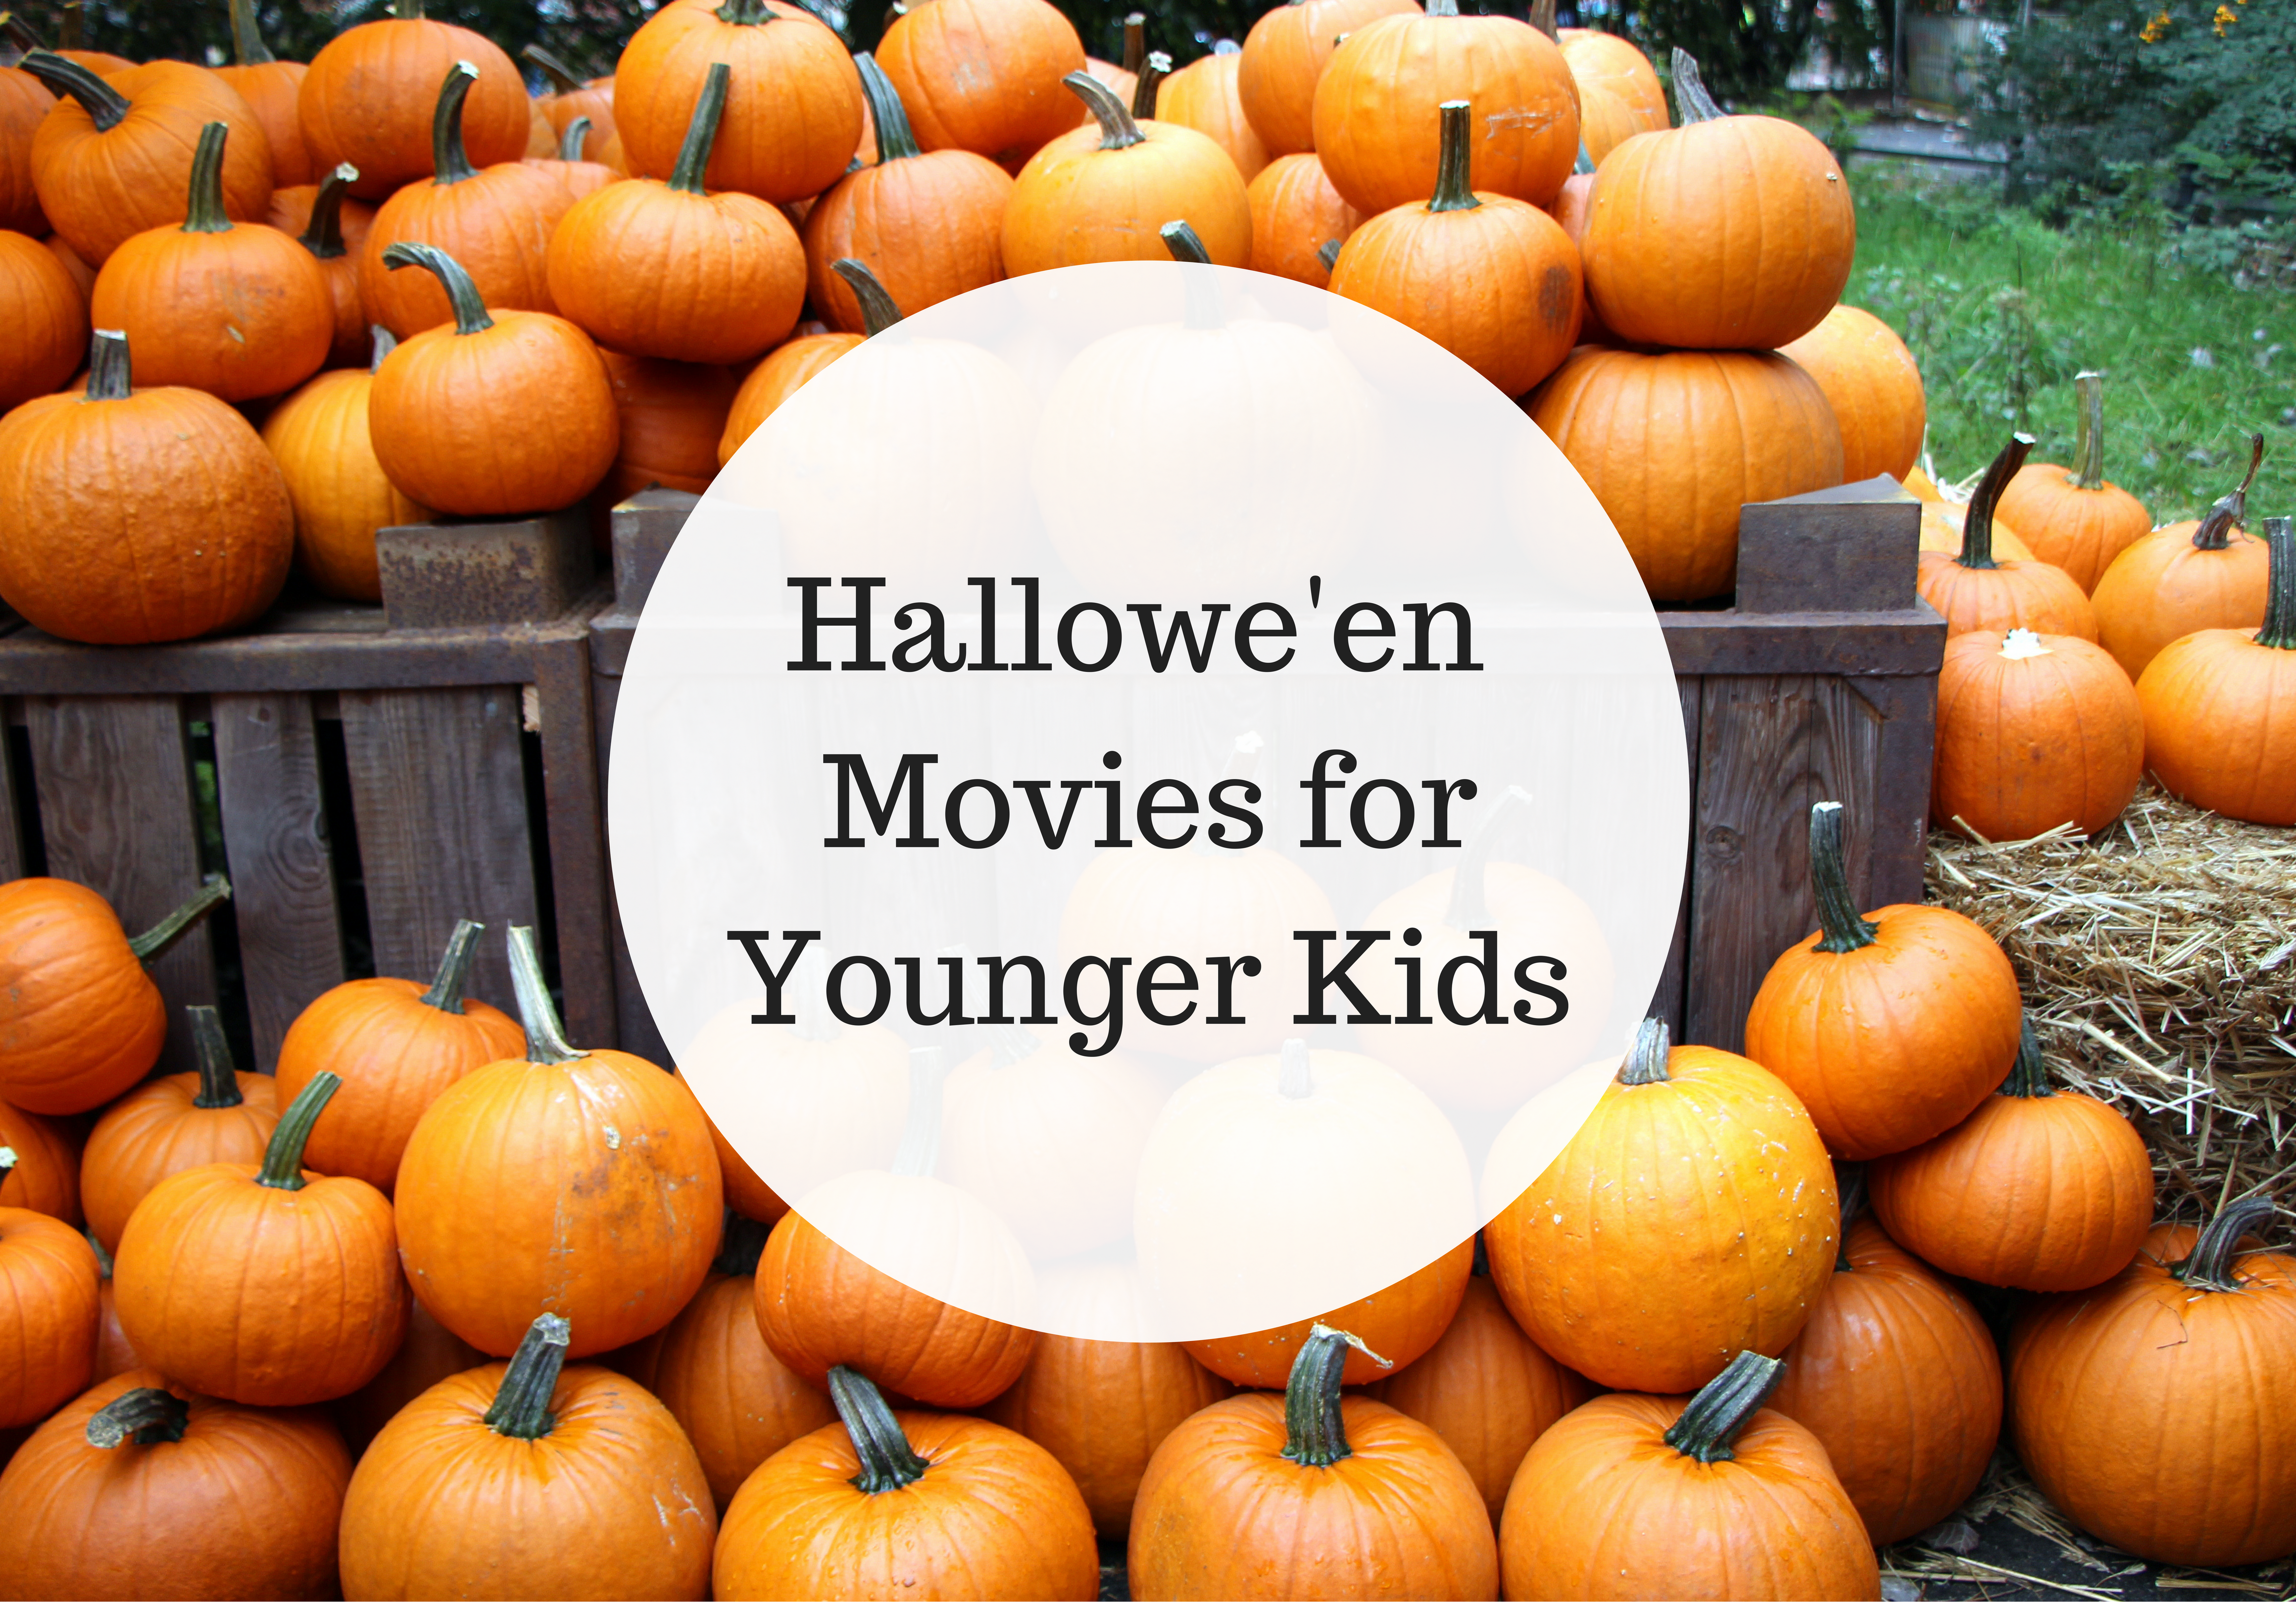 Hallowe'en Movies forYounger Kids